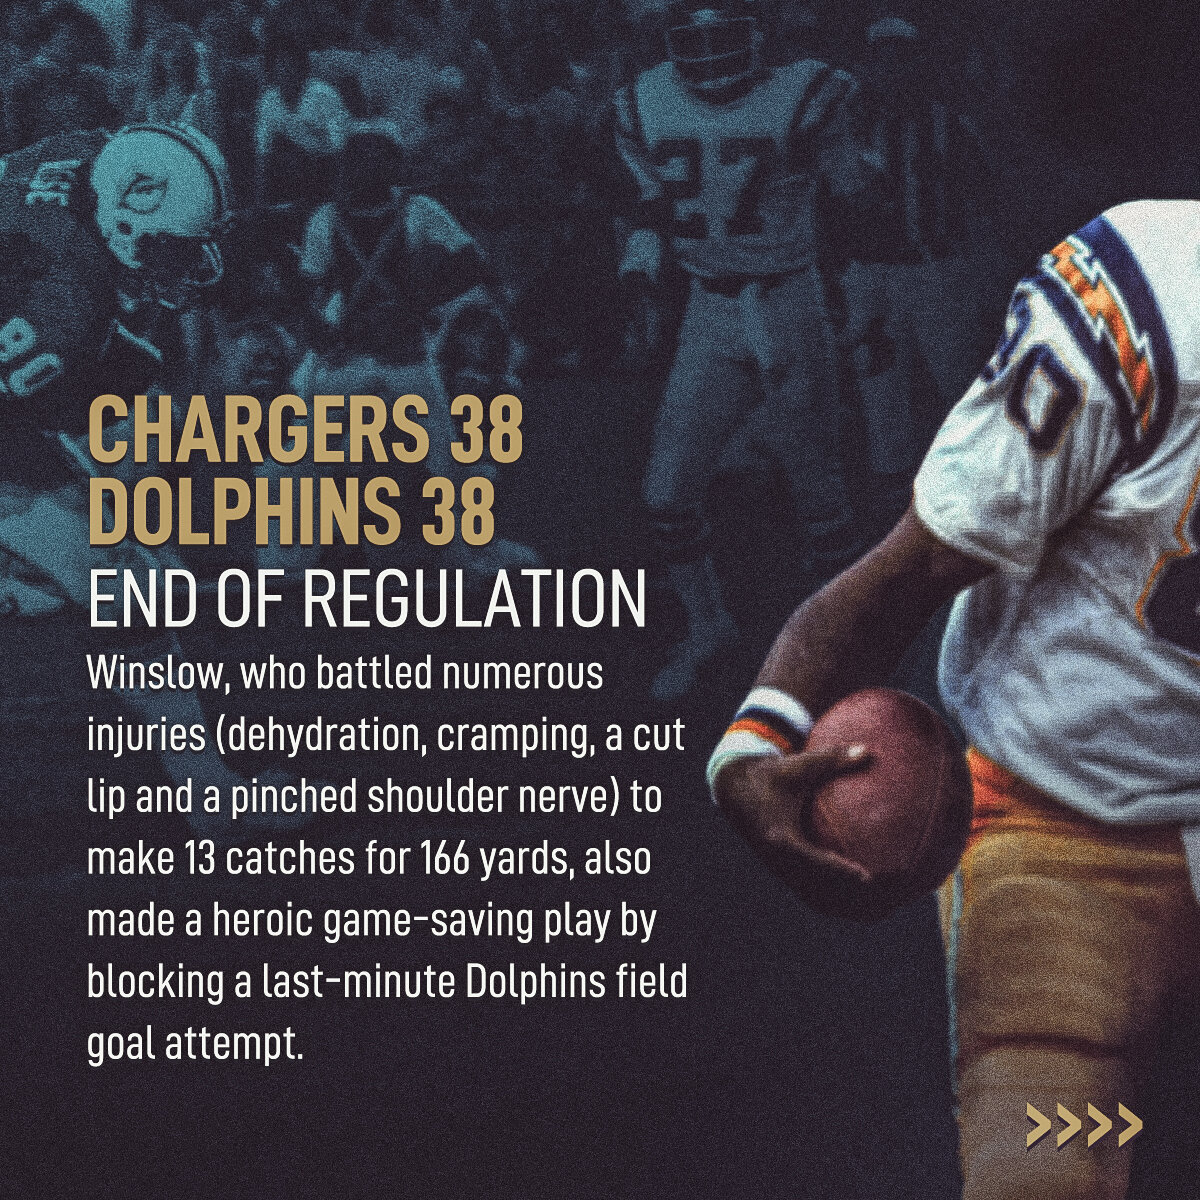 190924_NFL_GreatestGames_ChargersDolphins_Carousel_SO_05.jpg